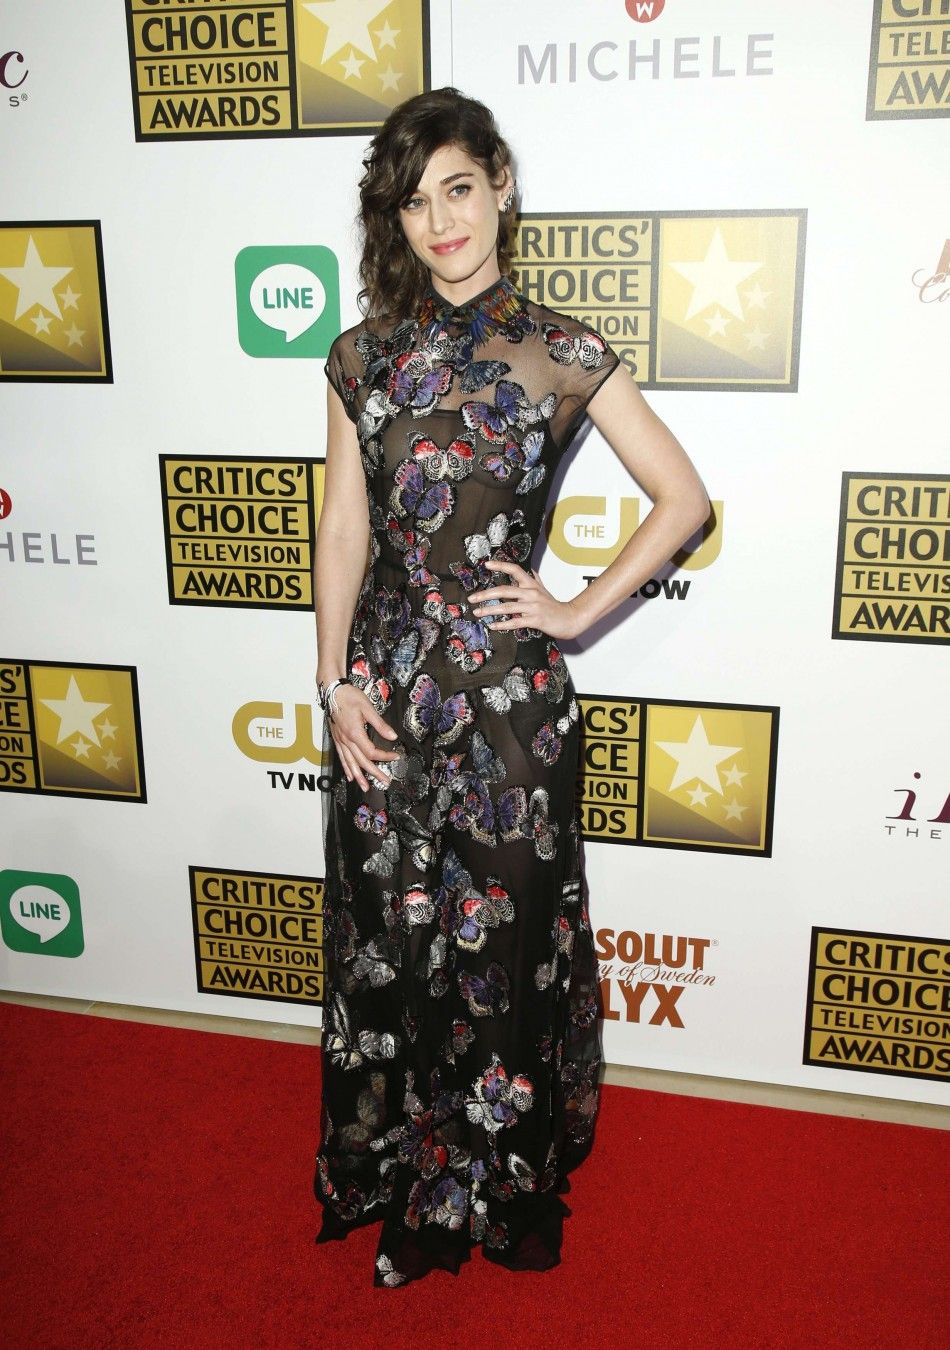 Actress Caplan Poses at the 4th Annual Critics Choice Television Awards in Beverly Hills, California